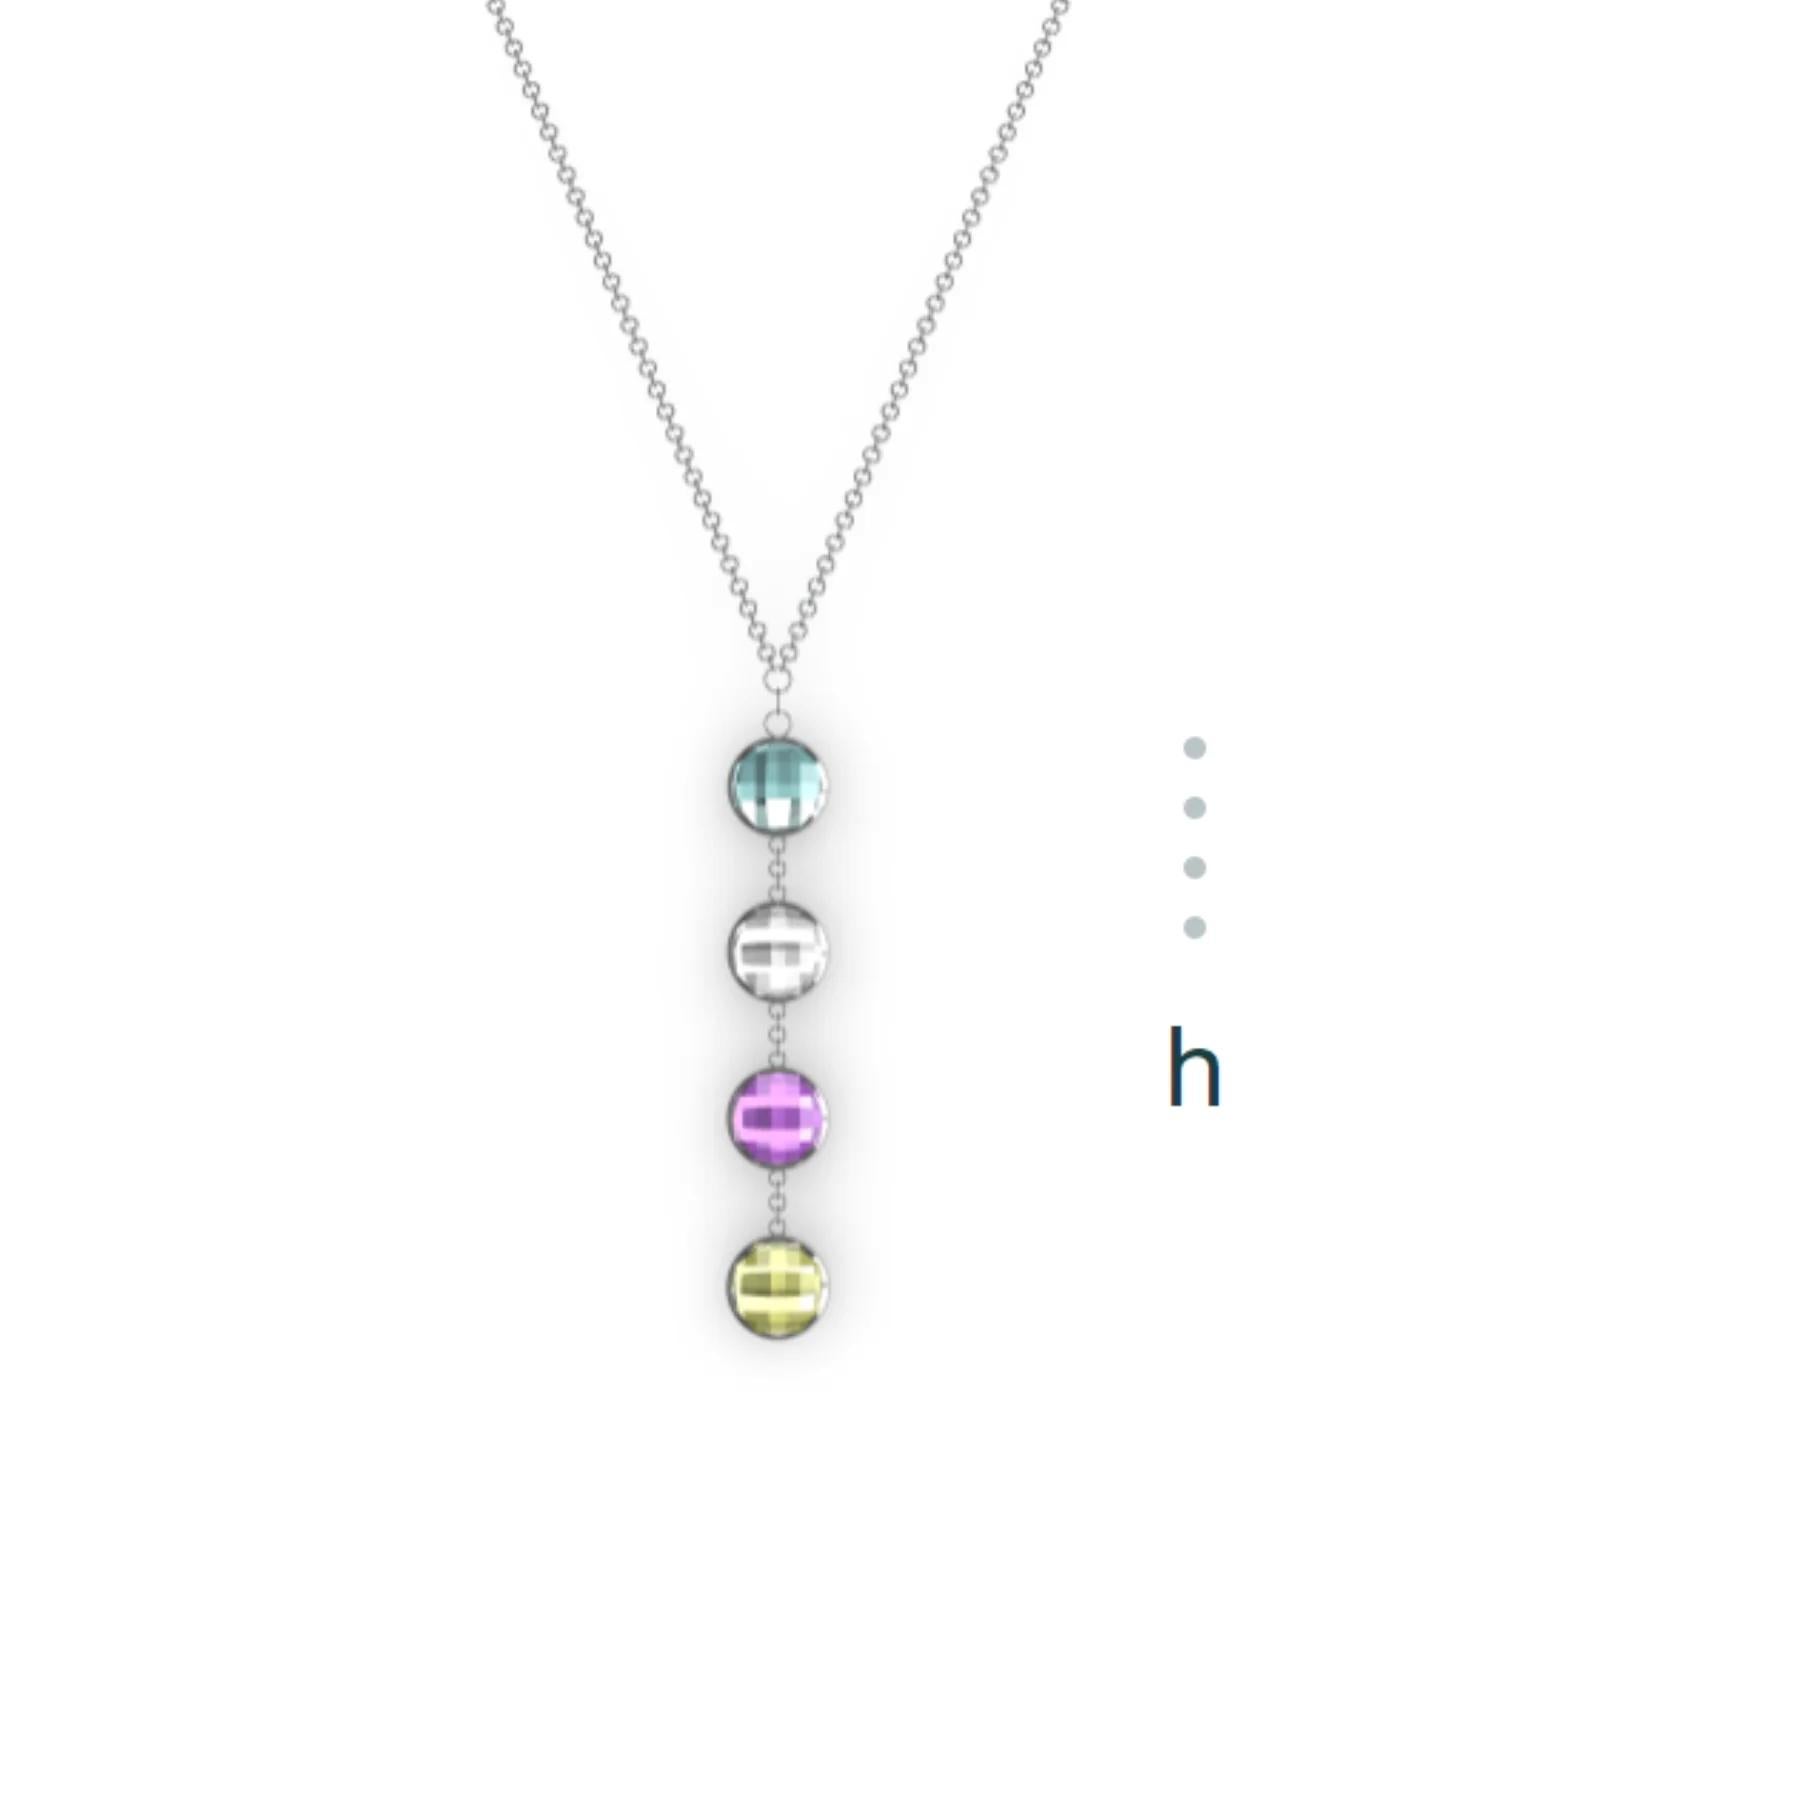 H is for Hope, Harmony, Healing… Encode the letters of your name, your children's initials, your lucky numbers, or a secret message of inspiration.

Details of this piece:
Handcrafted
Recycled 925 sterling silver

About Us
In the intricate dance of